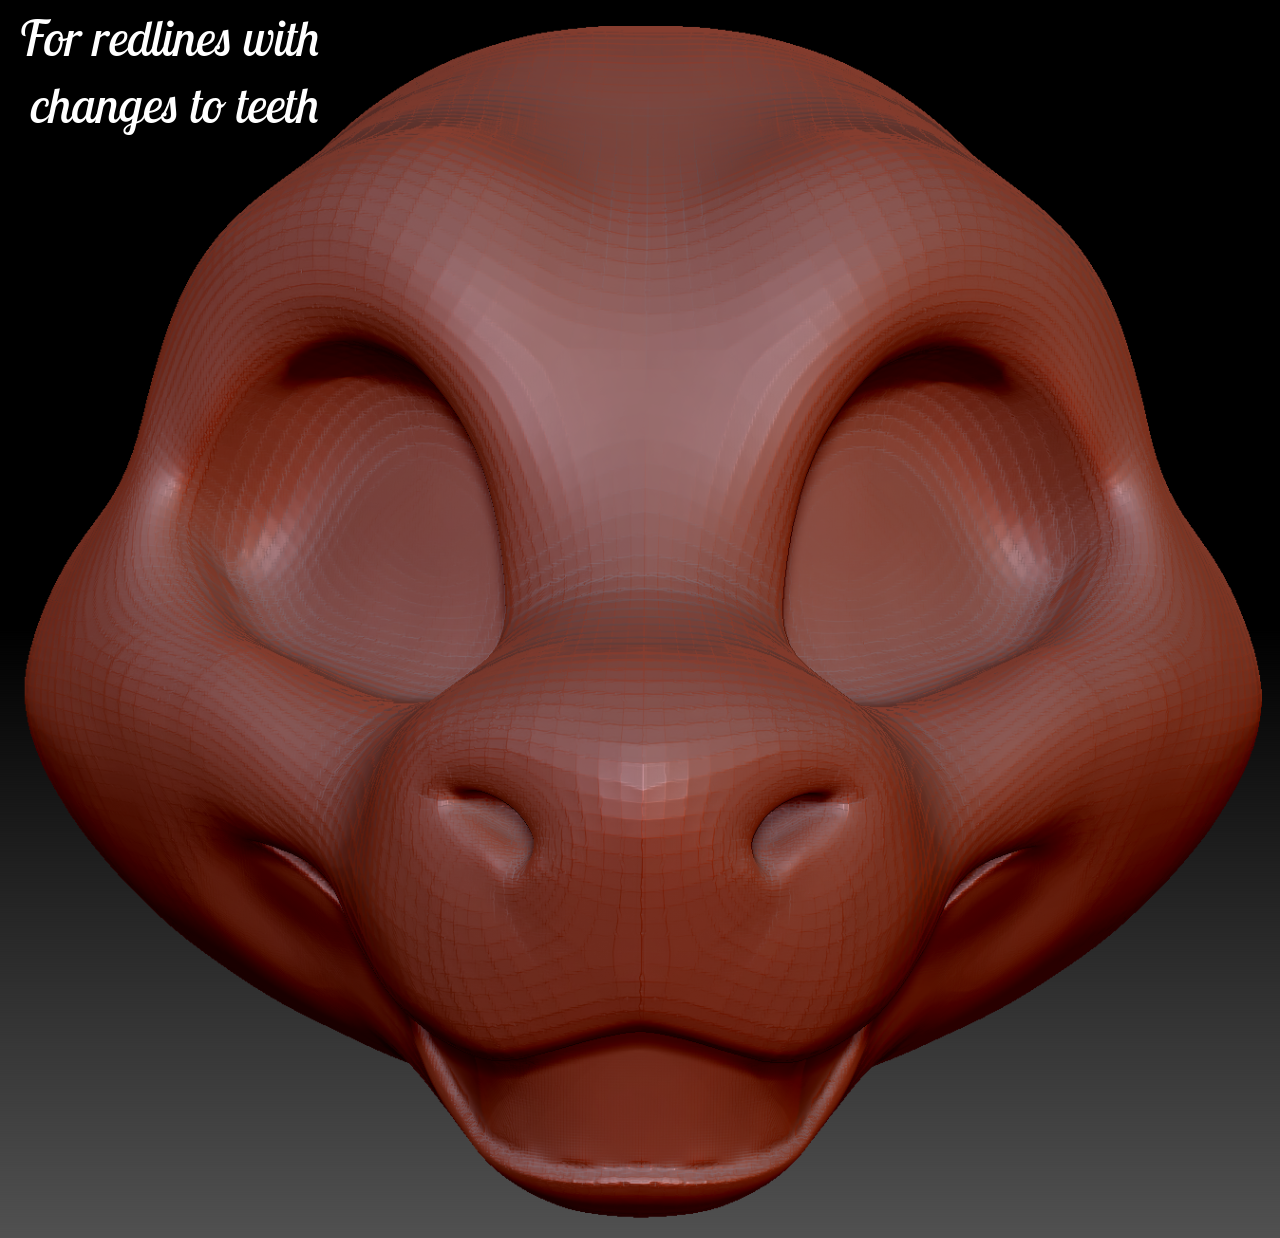 Gender Neutral Toony Round-nosed Dragon Head Base Variant 3